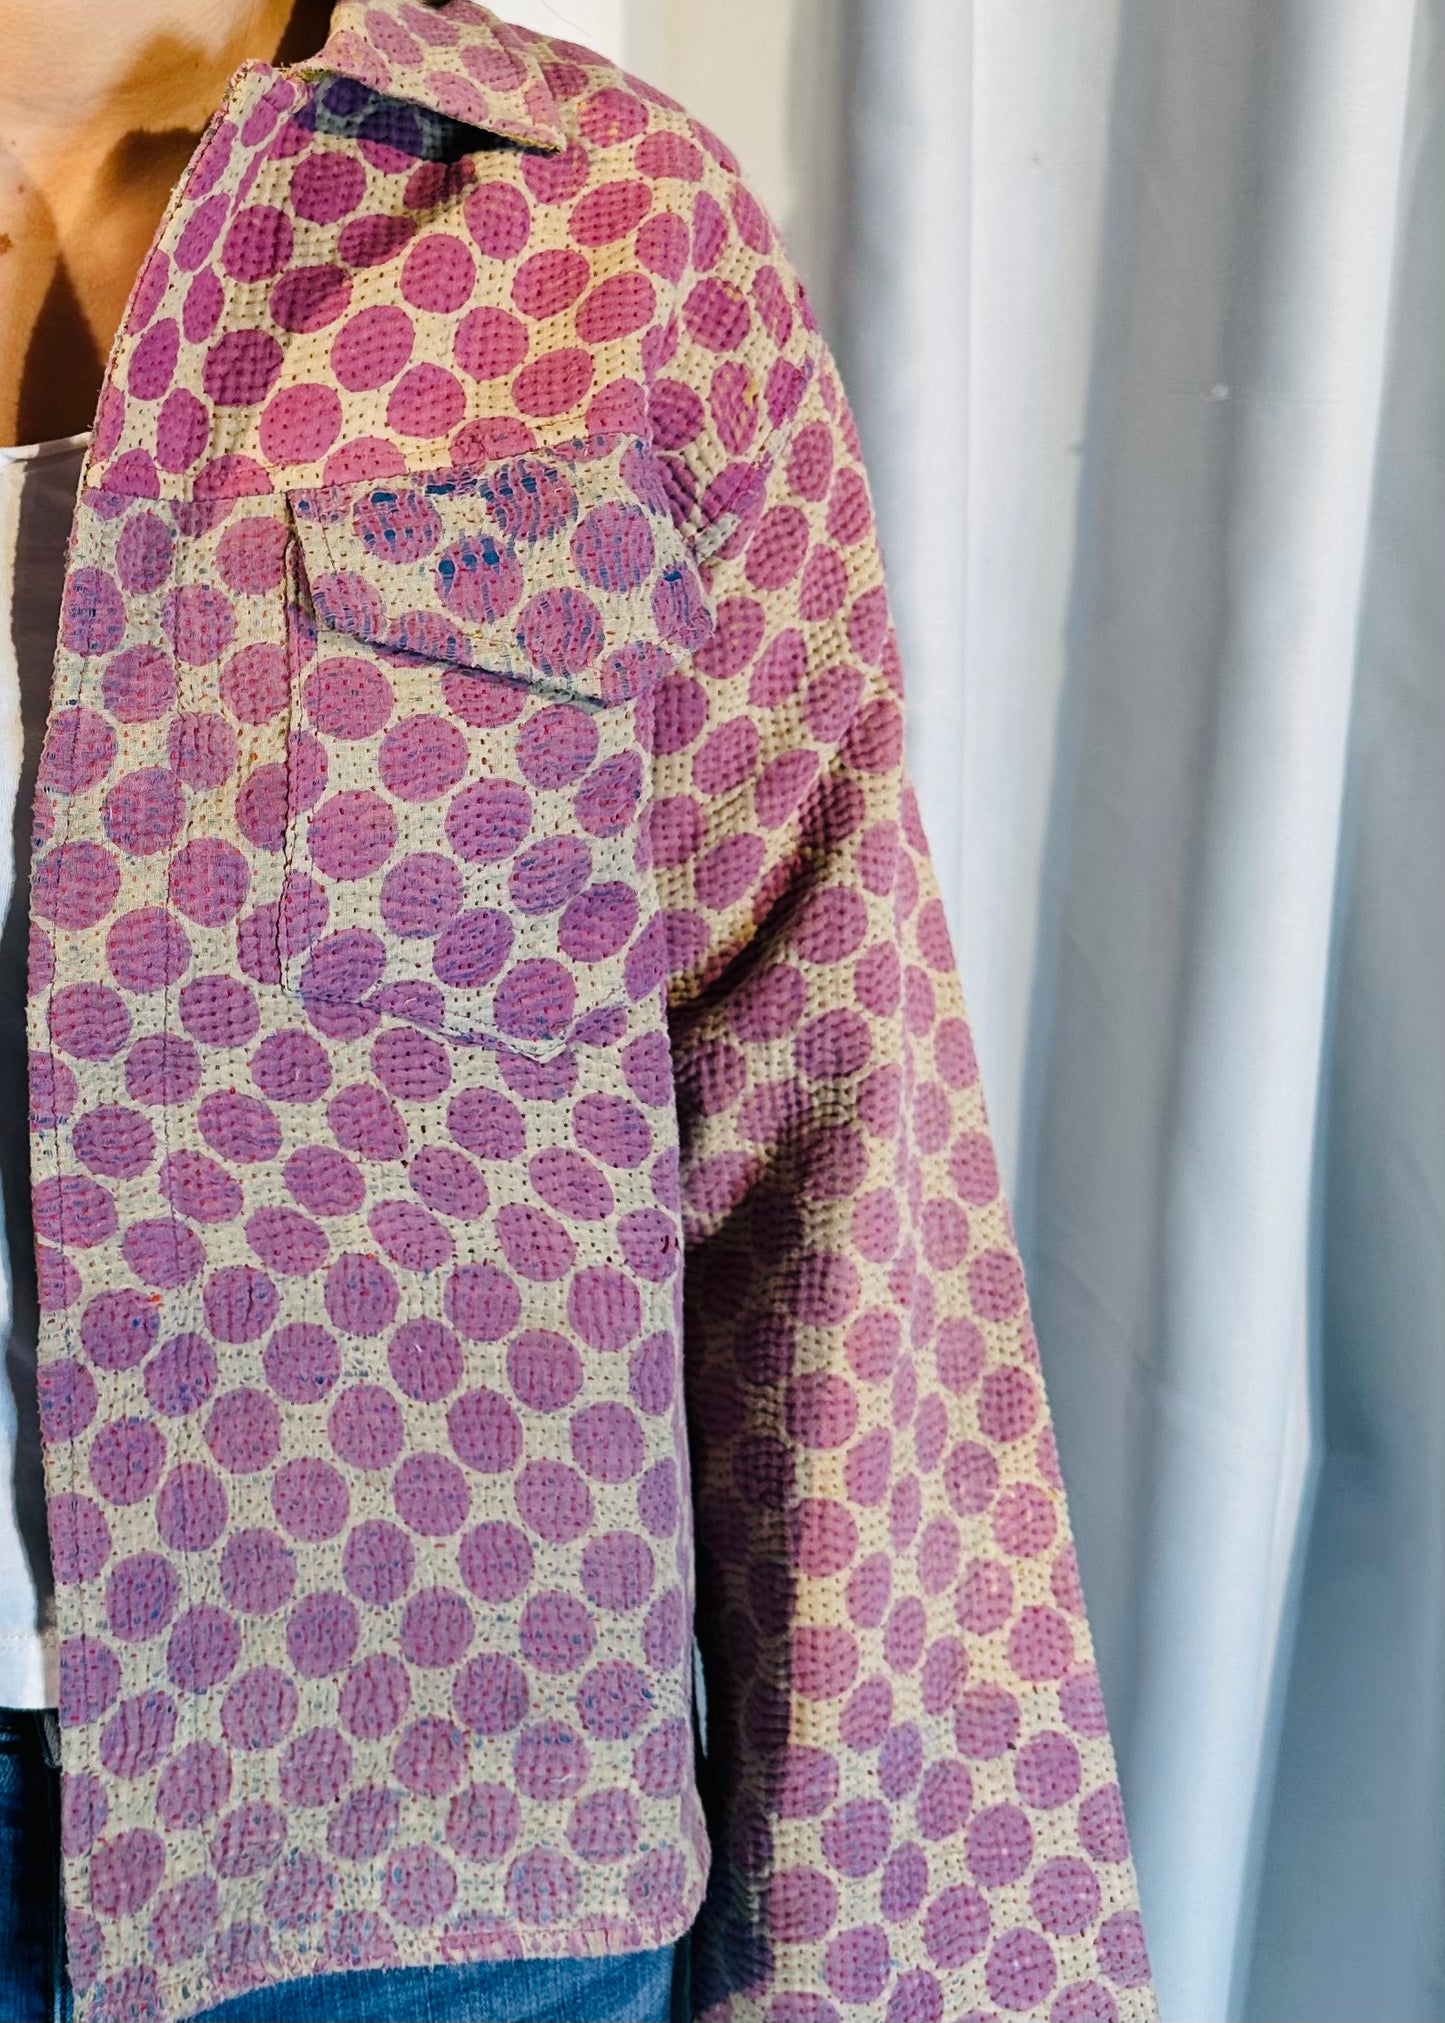 Sustainably Crafted Unique Quilted Trucker Jacket with Purple Polka Dots on Cream from Recycled Saris - DharBazaar